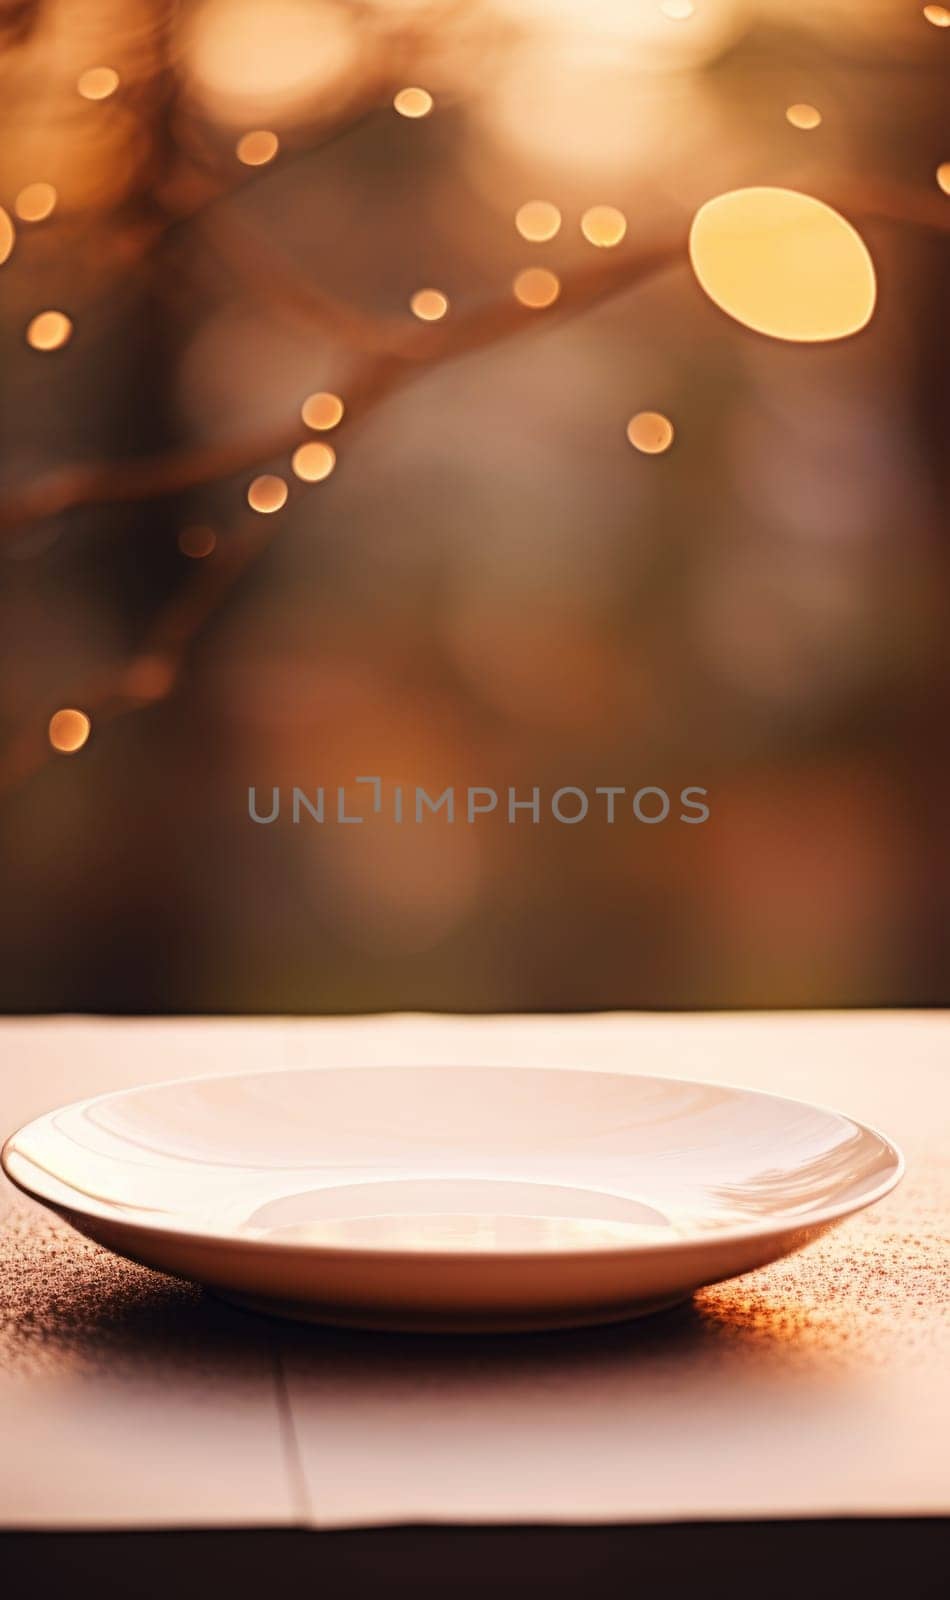 Empty plate on table with blurred background, AI by starush